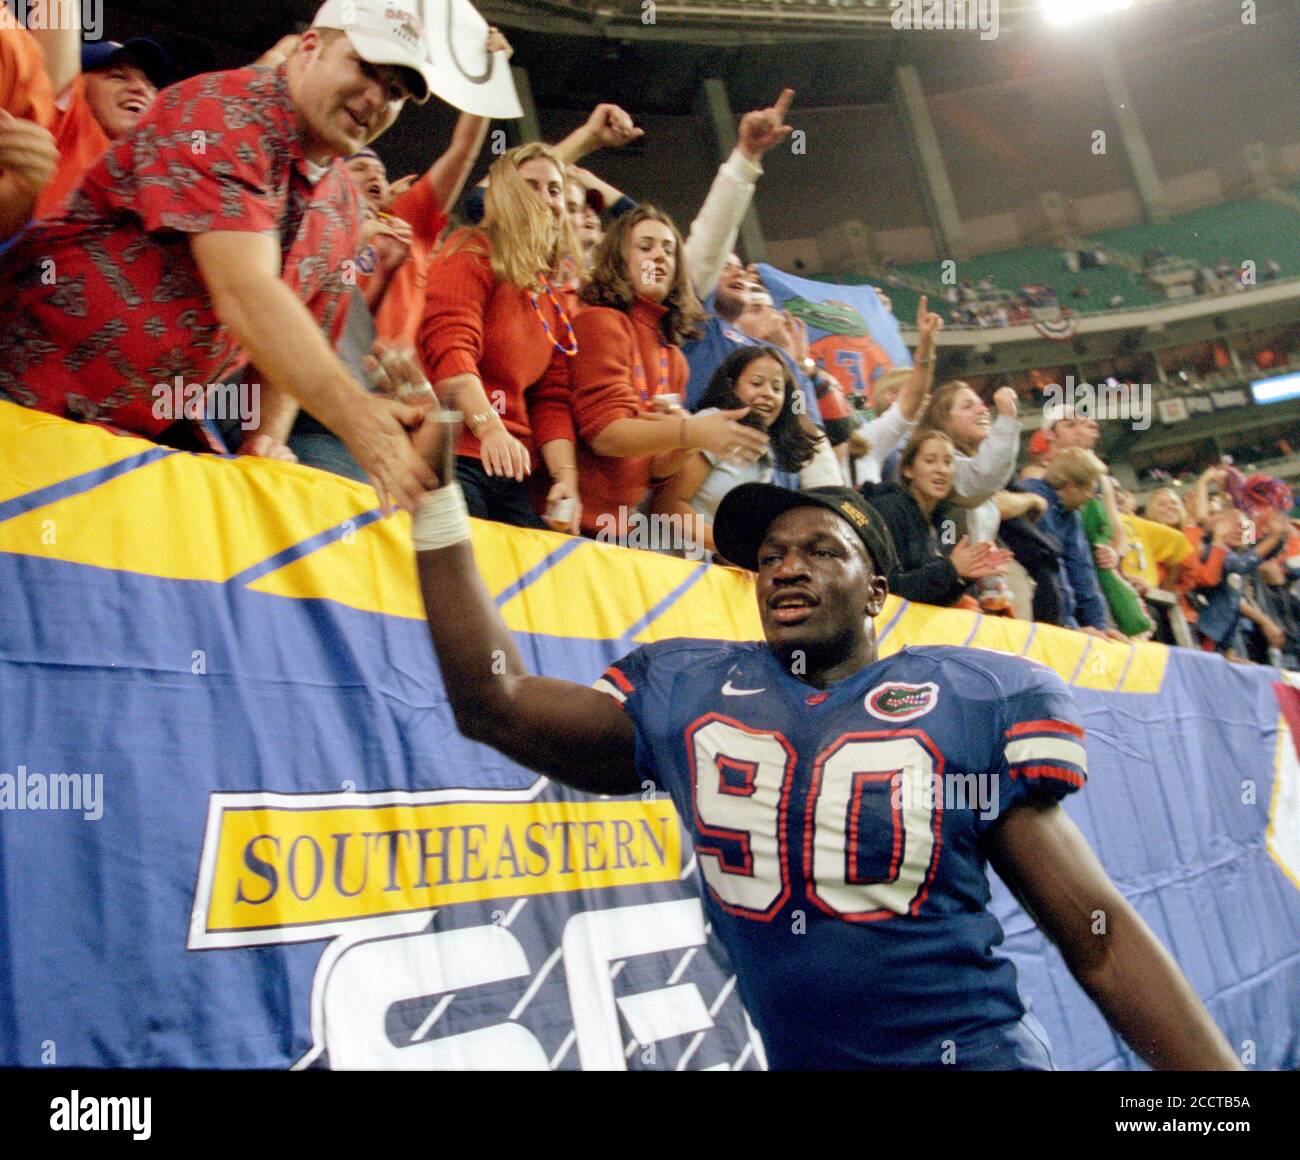 University of Florida football defensive end Thaddeus Bullard celebrates the Gators SEC Championship victory over Auburn with fans on December 2, 2000 in Atlanta, Georgia. Bullard went on to become known as Titus O'Neal in WWE wresting. Stock Photo